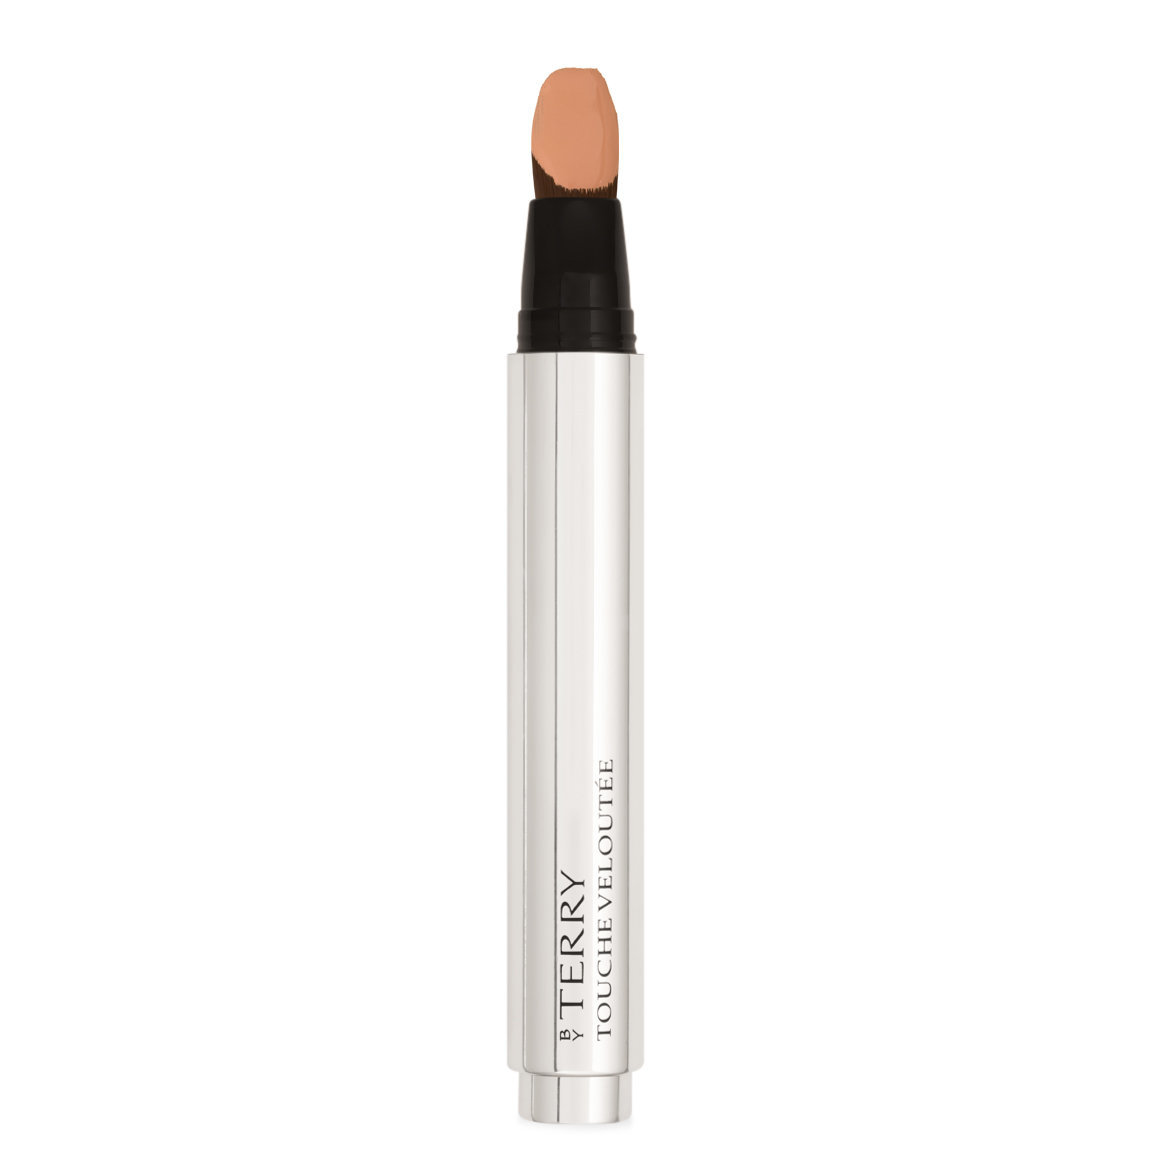 BY TERRY Touche Veloutée Highlighting Concealer Brush 4 Sienna alternative view 1.